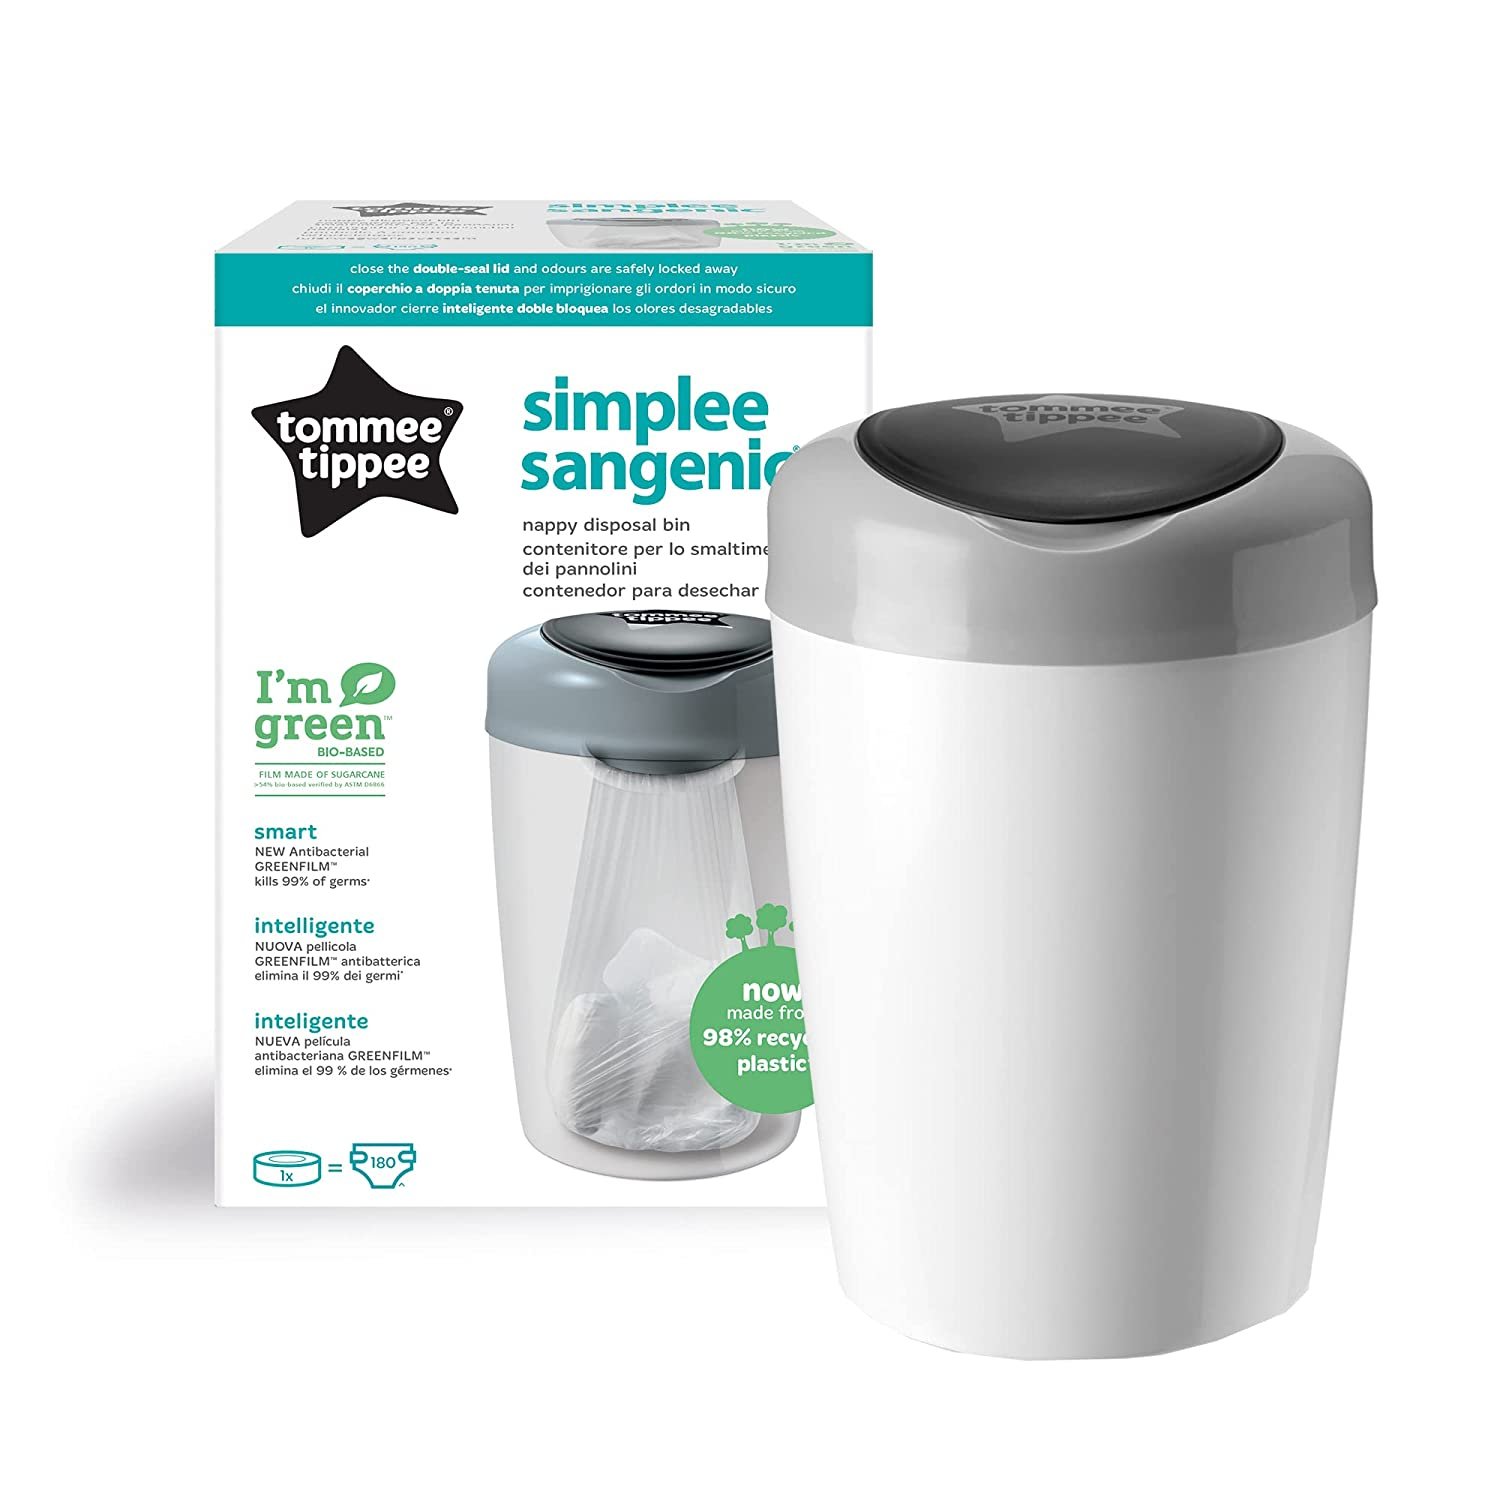 Tommee Tippee Sangenic Simplee nappy pail